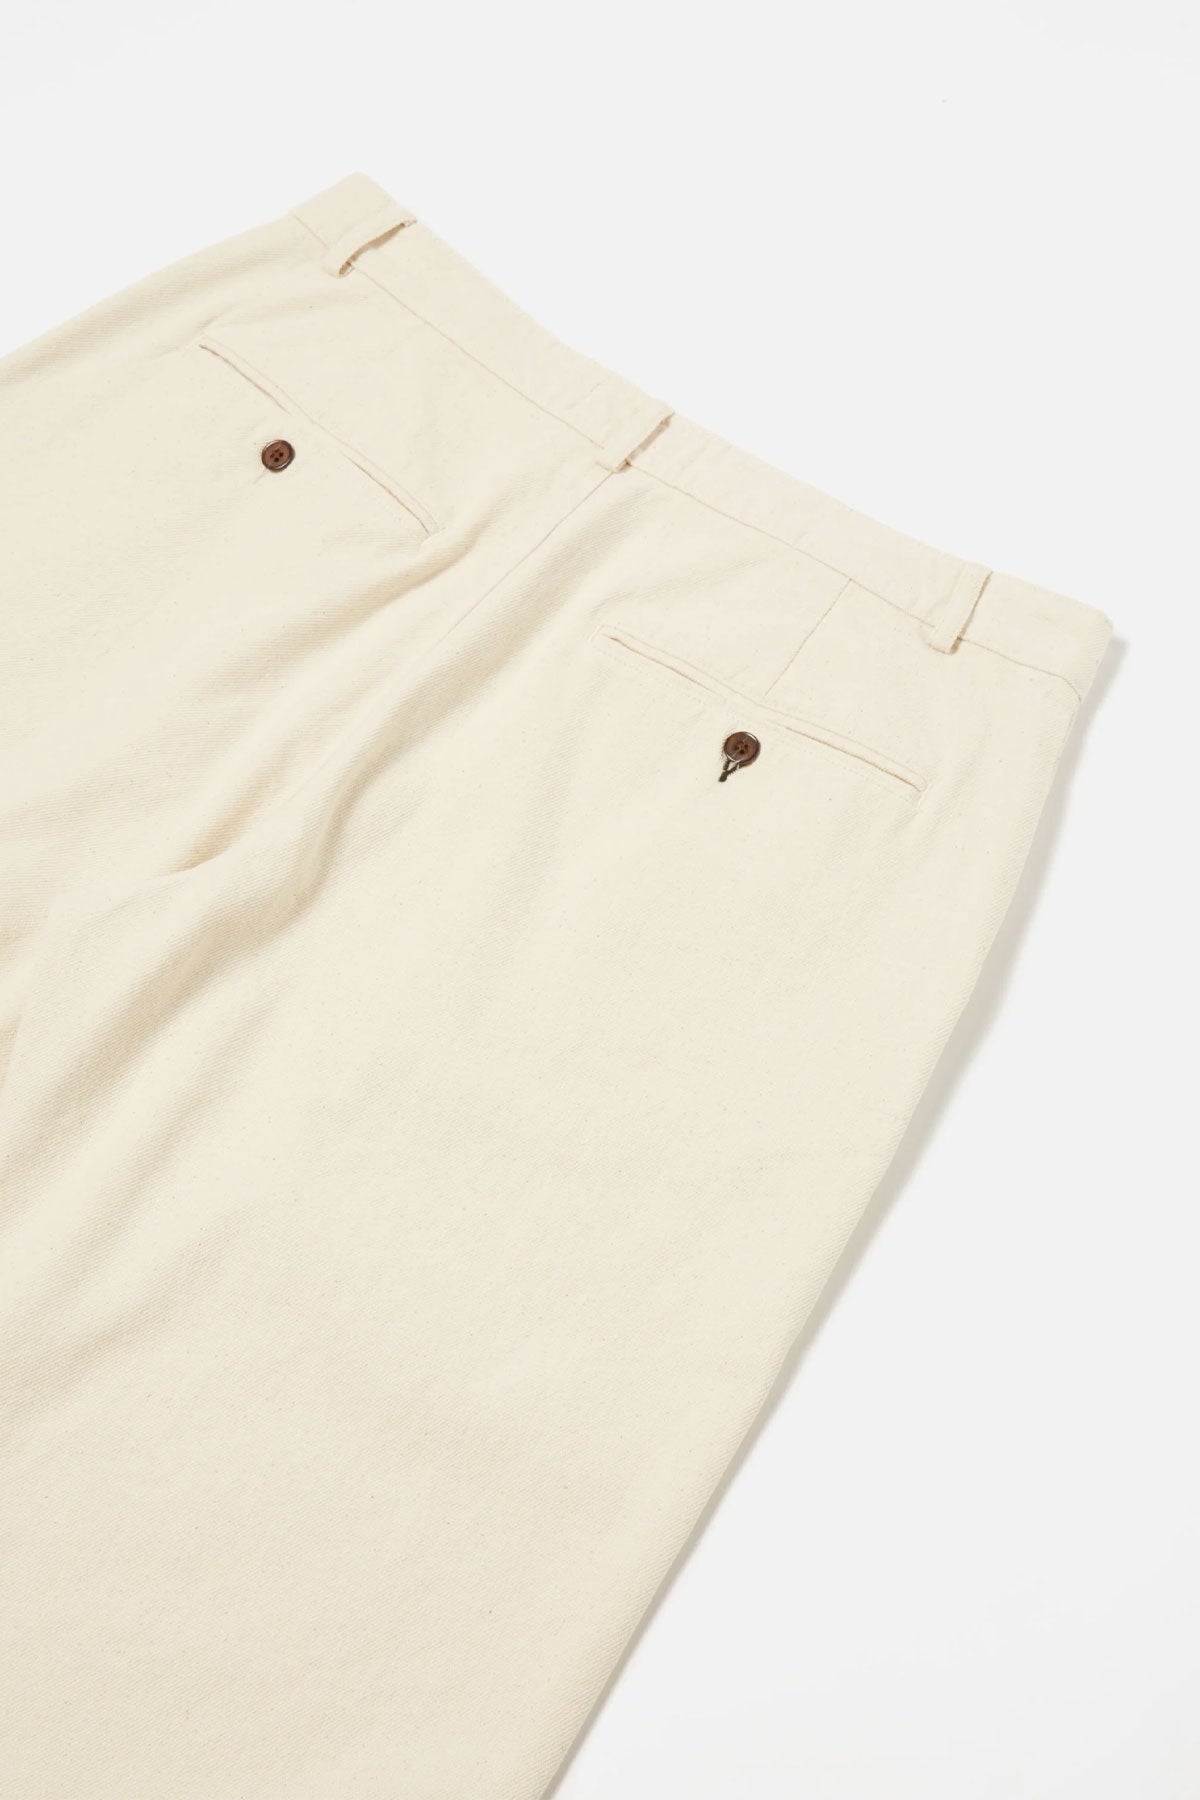 Universal Works - Military Chino In Ecru Recycled Cotton